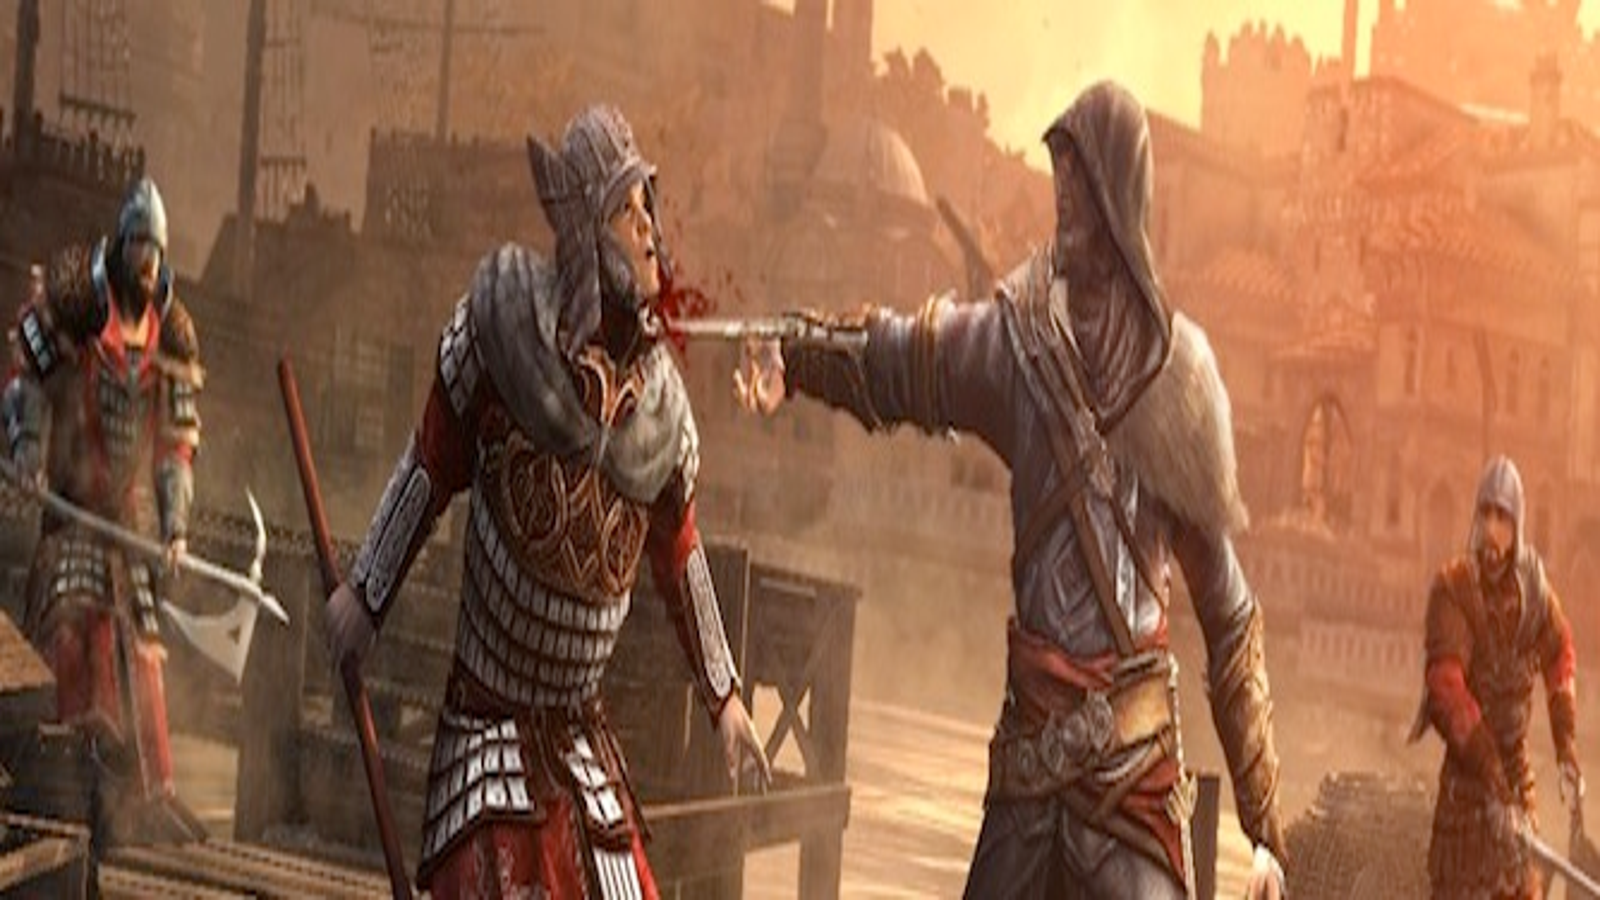 Assassin's Creed: Revelations Review - GameSpot